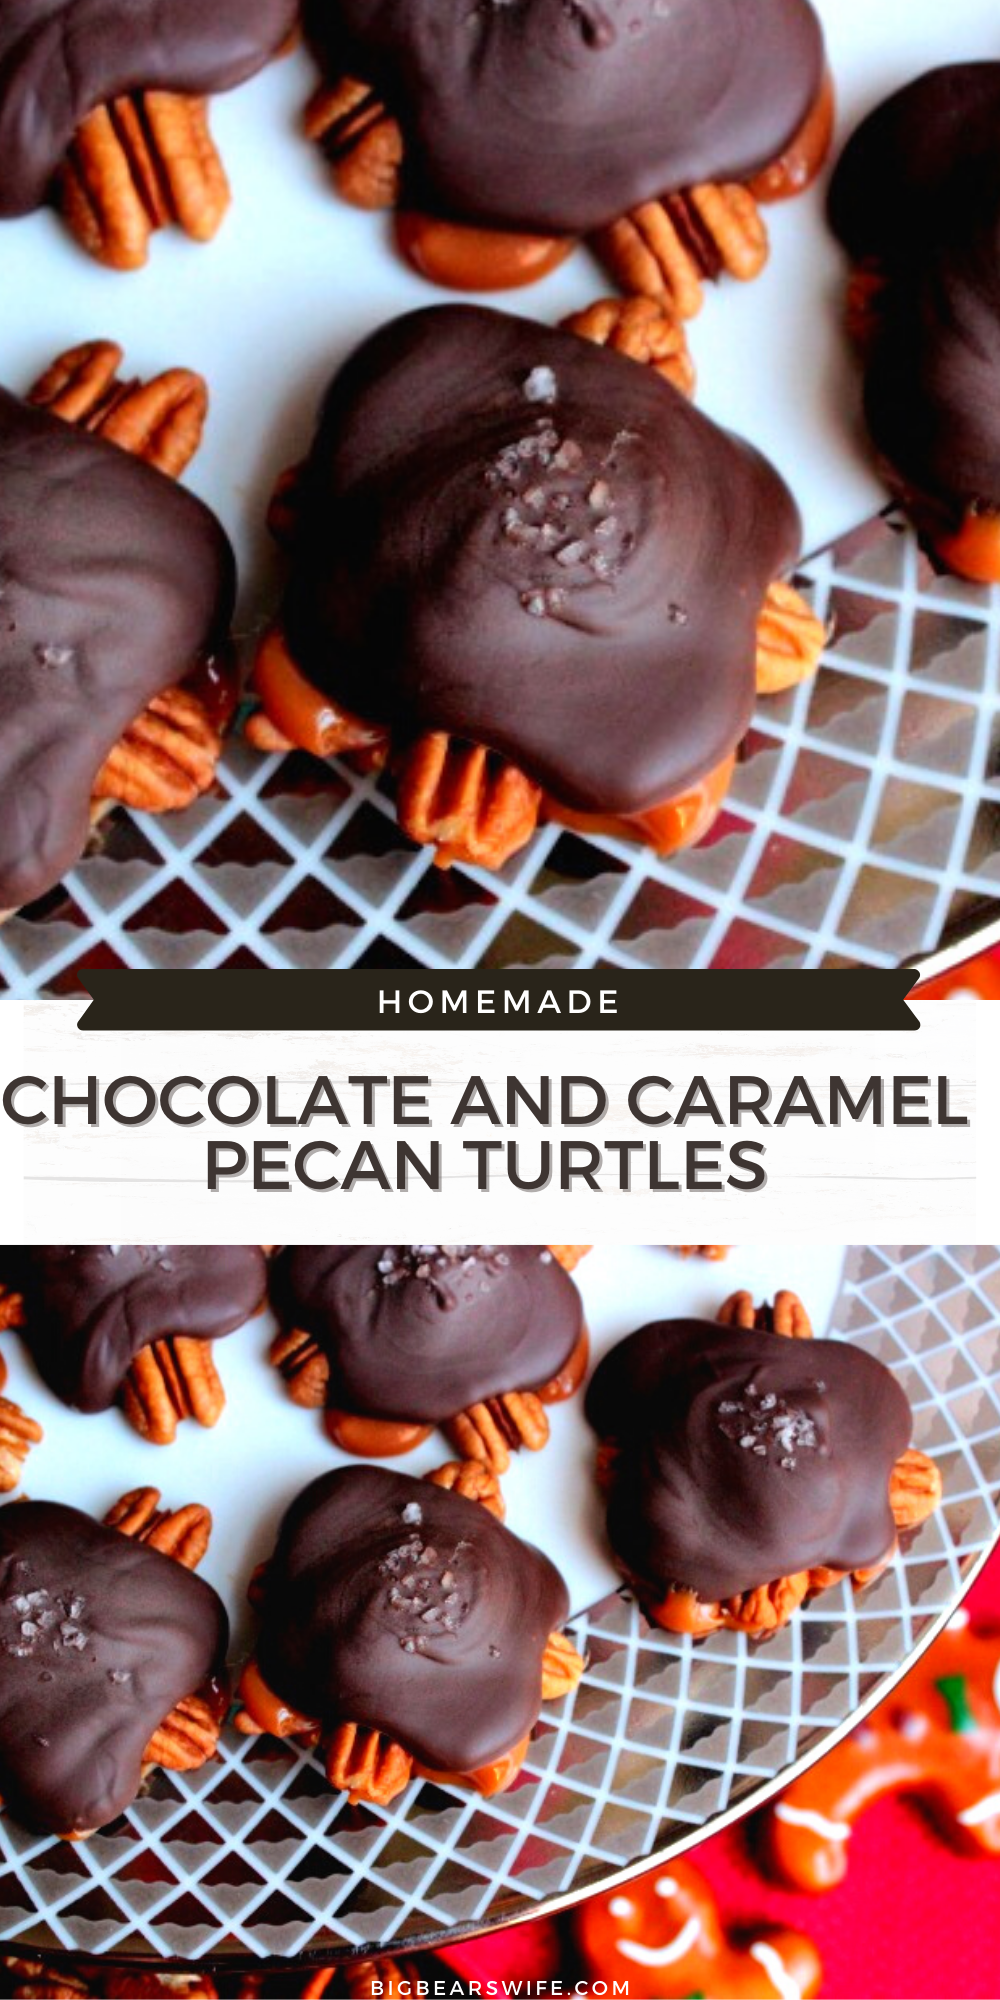 Ready to make Homemade Chocolate and Caramel Pecan Turtles for Christmas? This recipe for Turtles is super easy and they are always a hit for Christmas gifts! Perfect as a Homemade Christmas Gift treat! via @bigbearswife